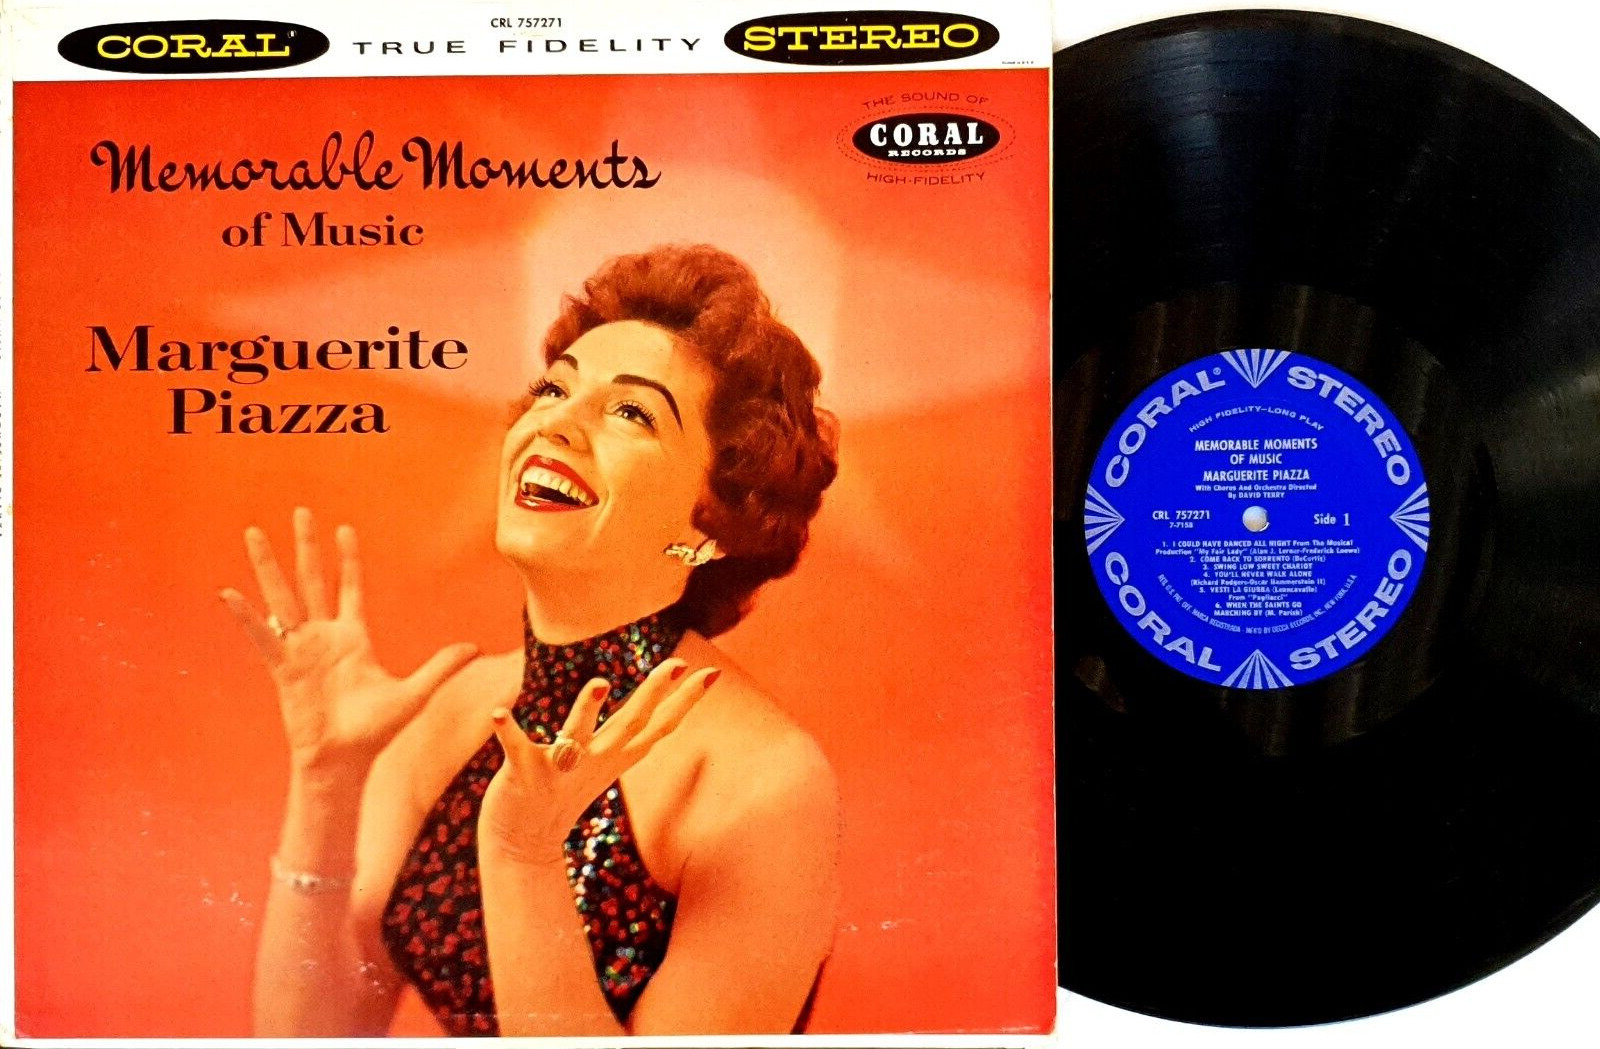 Marguerite Piazza–Memorable Moments Of Music Vinyl LP-1959 Coral USA CRL 757271